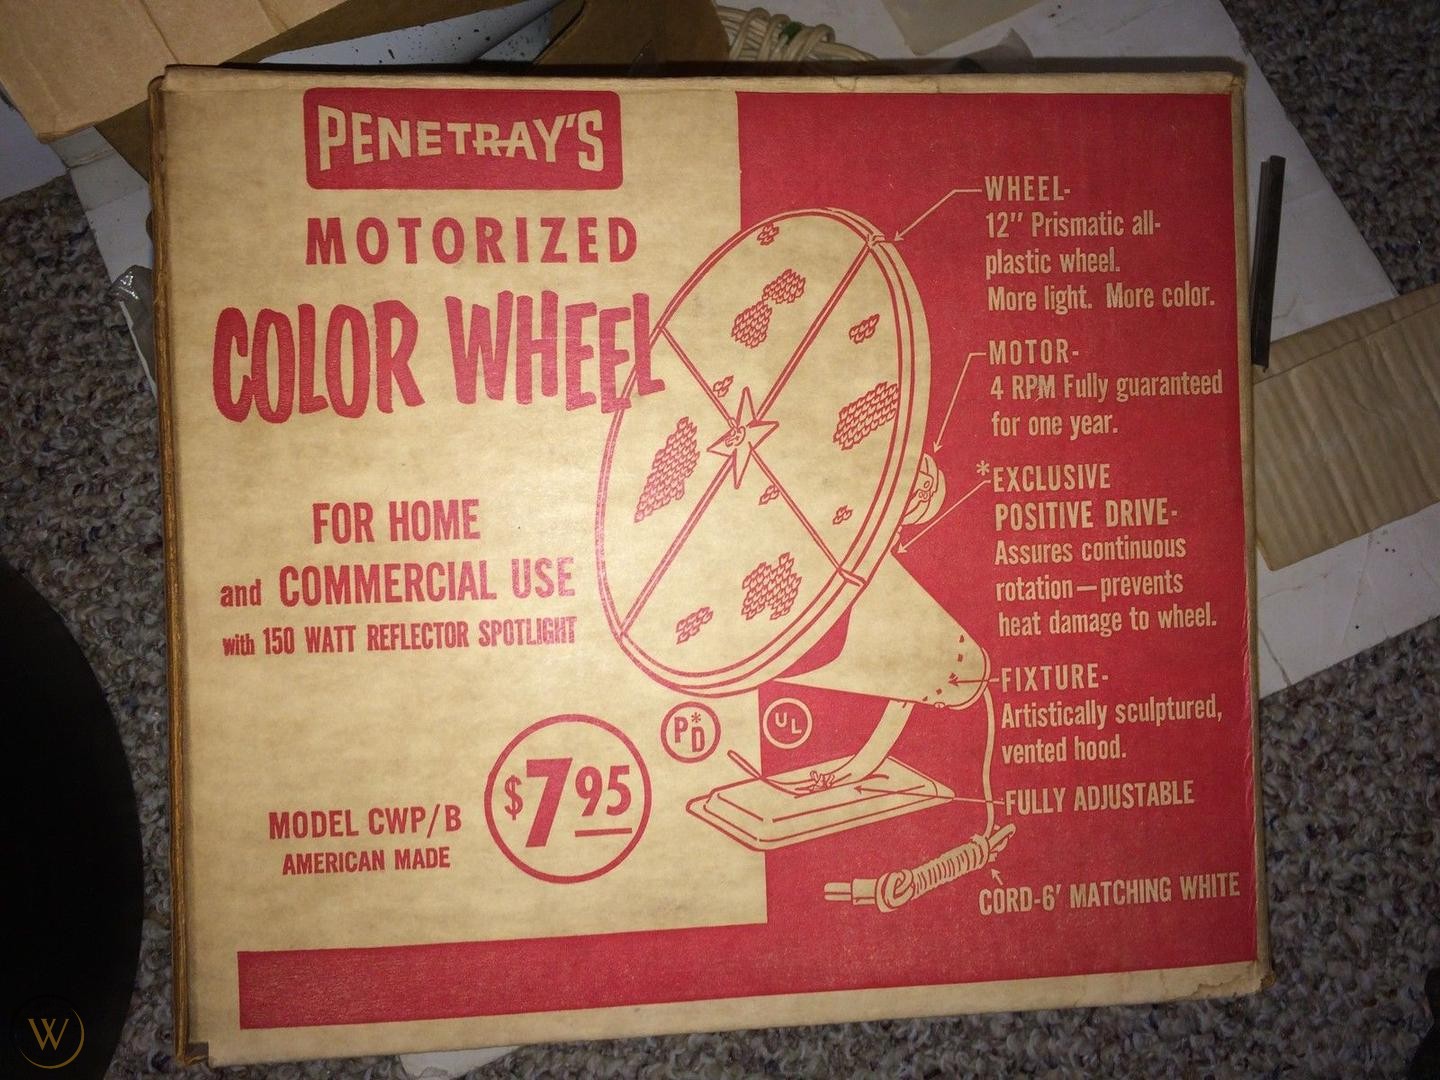 poster - Penetray'S Motorized Color Wheel 180 Wheel 12" Prismatic all plastic wheel. More light. More color. Motor 4 Rpm Fully guaranteed for one year. Exclusive Positive Drive Assures continuous rotationprevents heat damage to wheel. Fixture Artistically